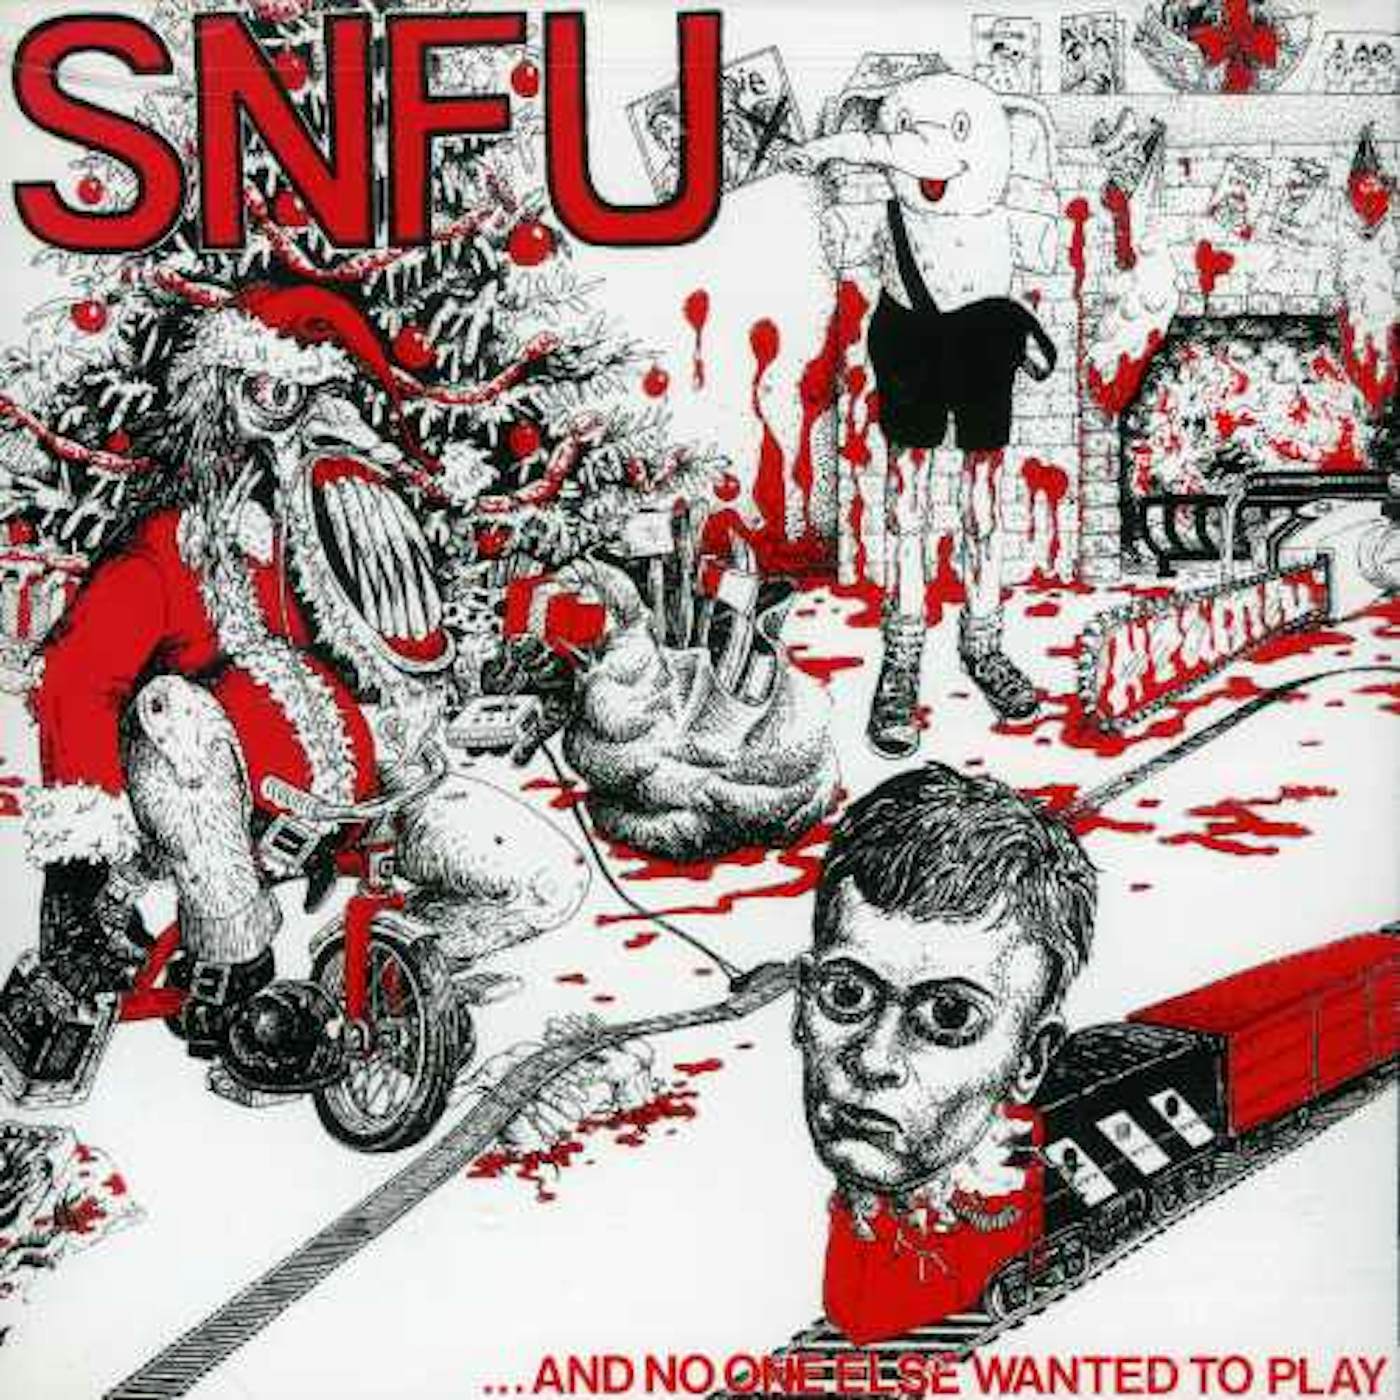 SNFU AND NO ONE ELSE WANTED TO PLAY CD